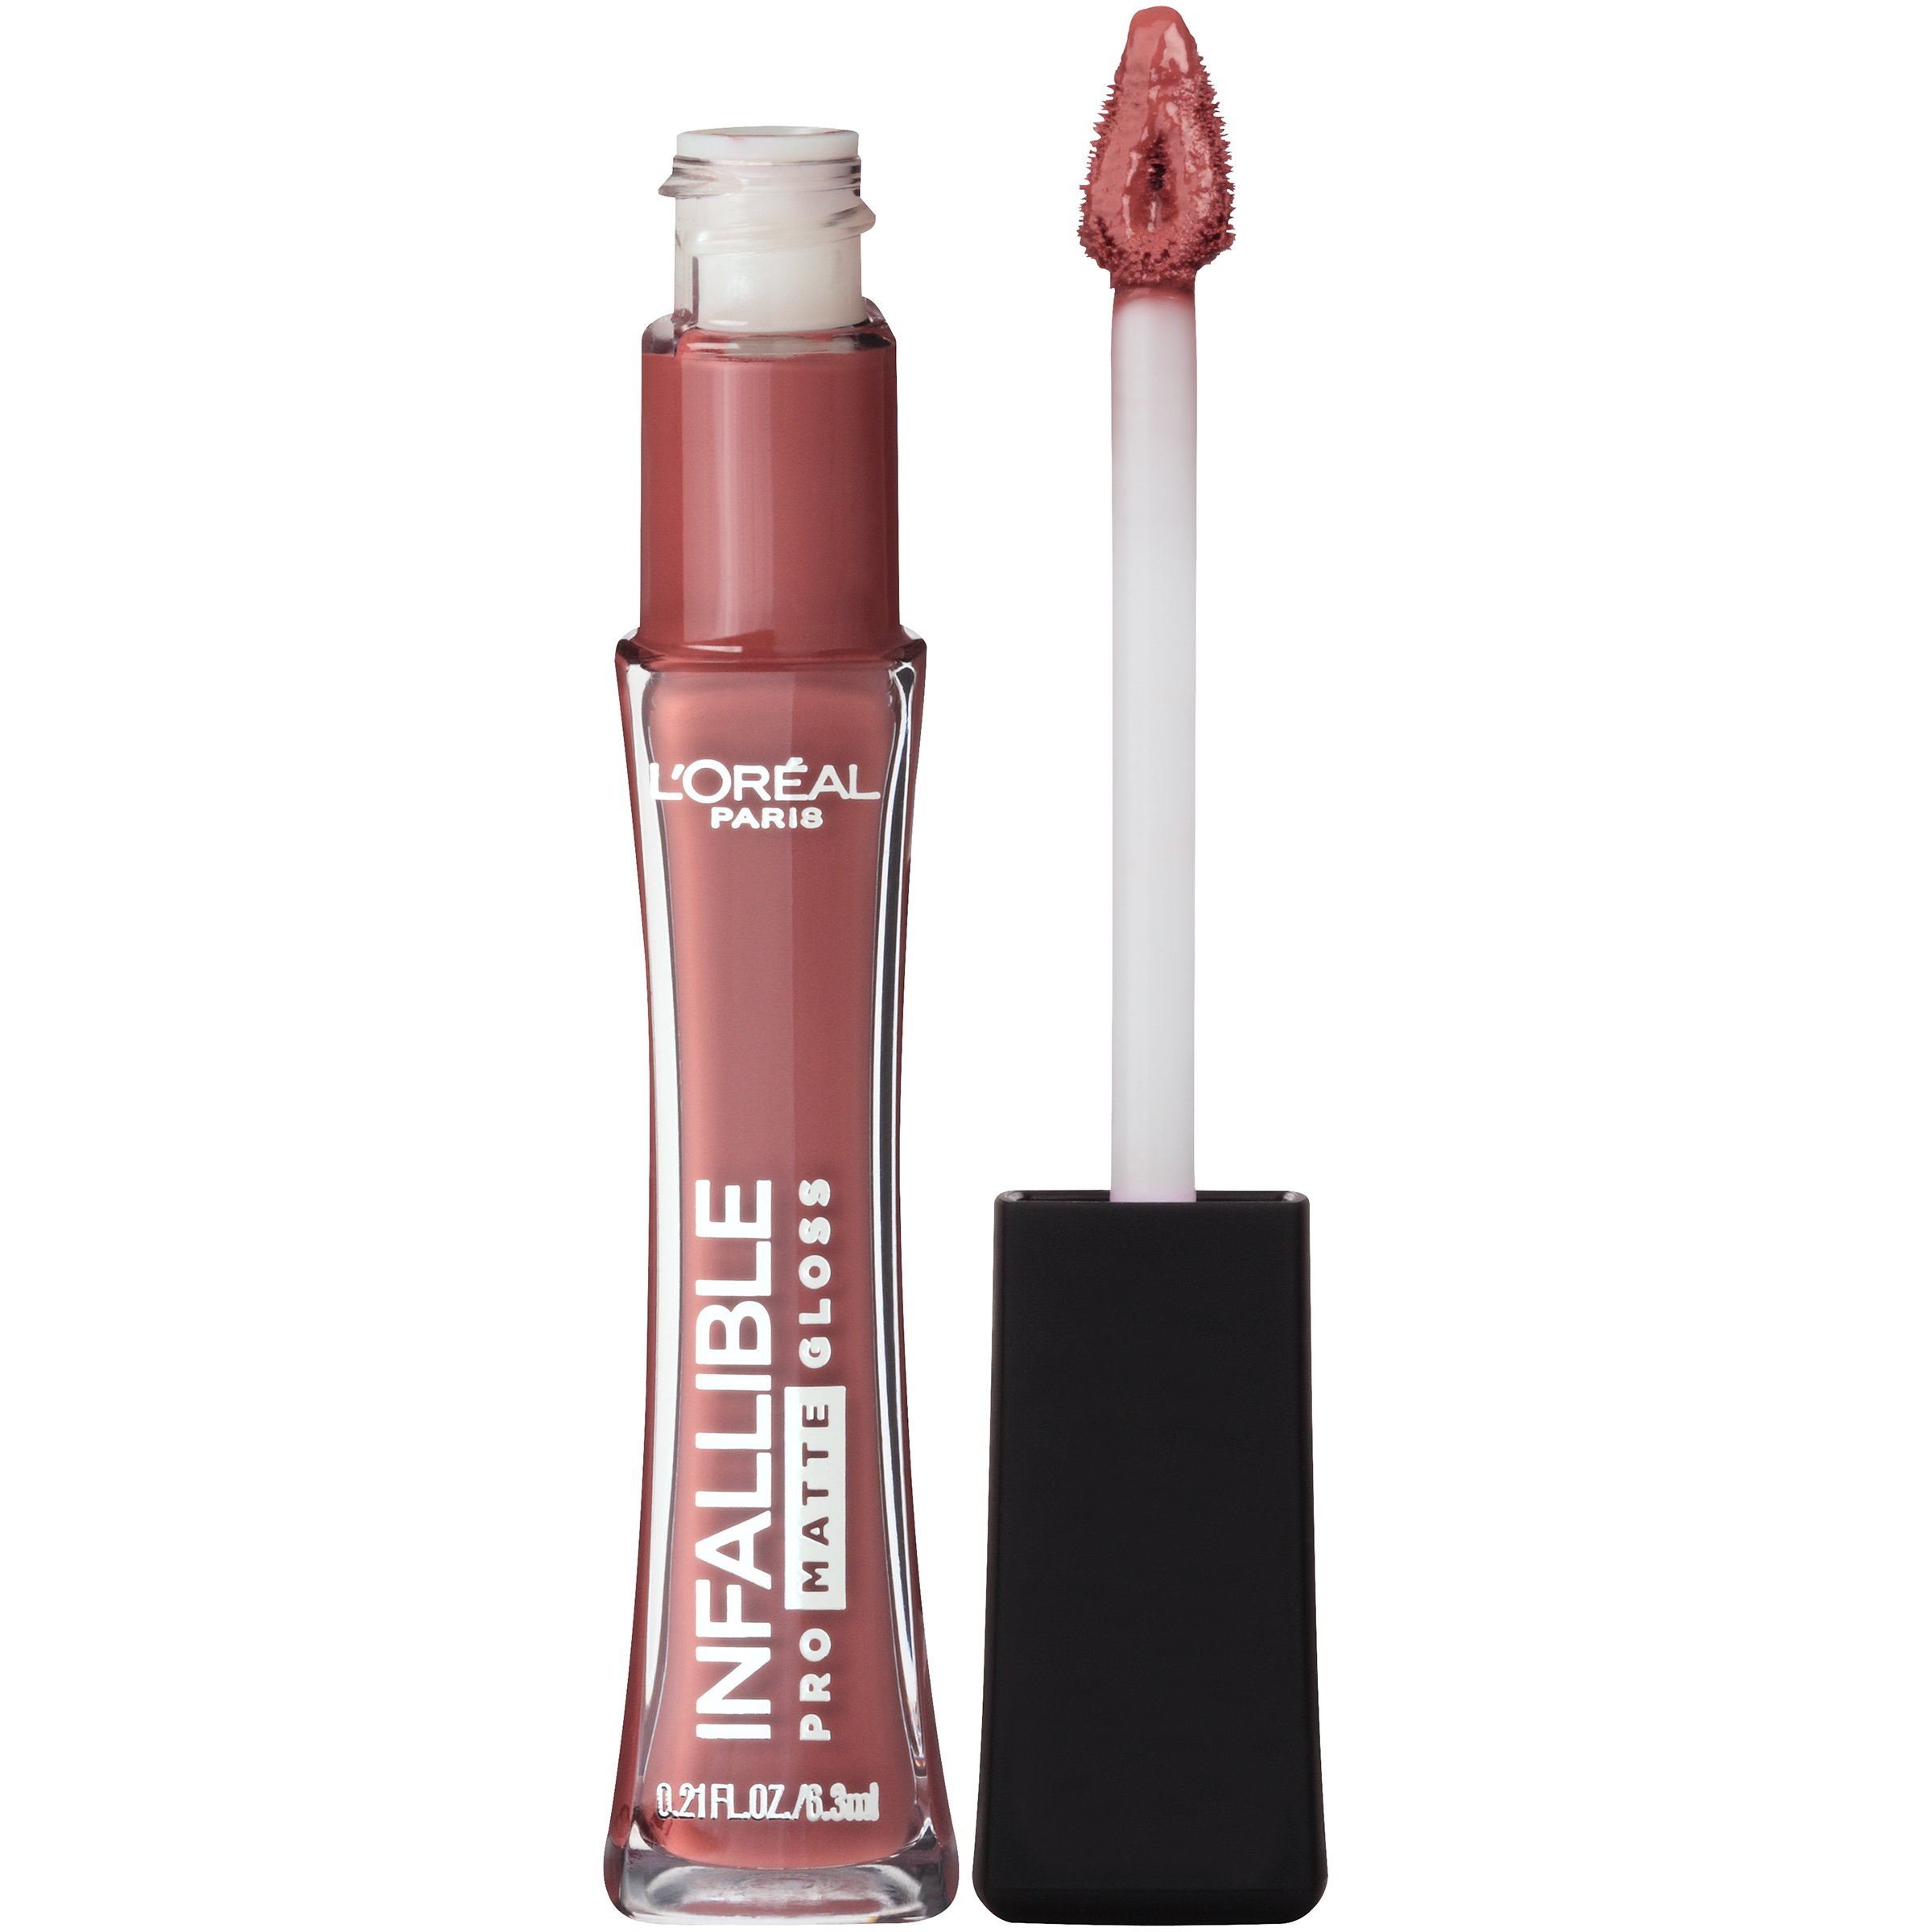 LOreal Paris Infallible Pro-Matte Gloss Nude Allude Review